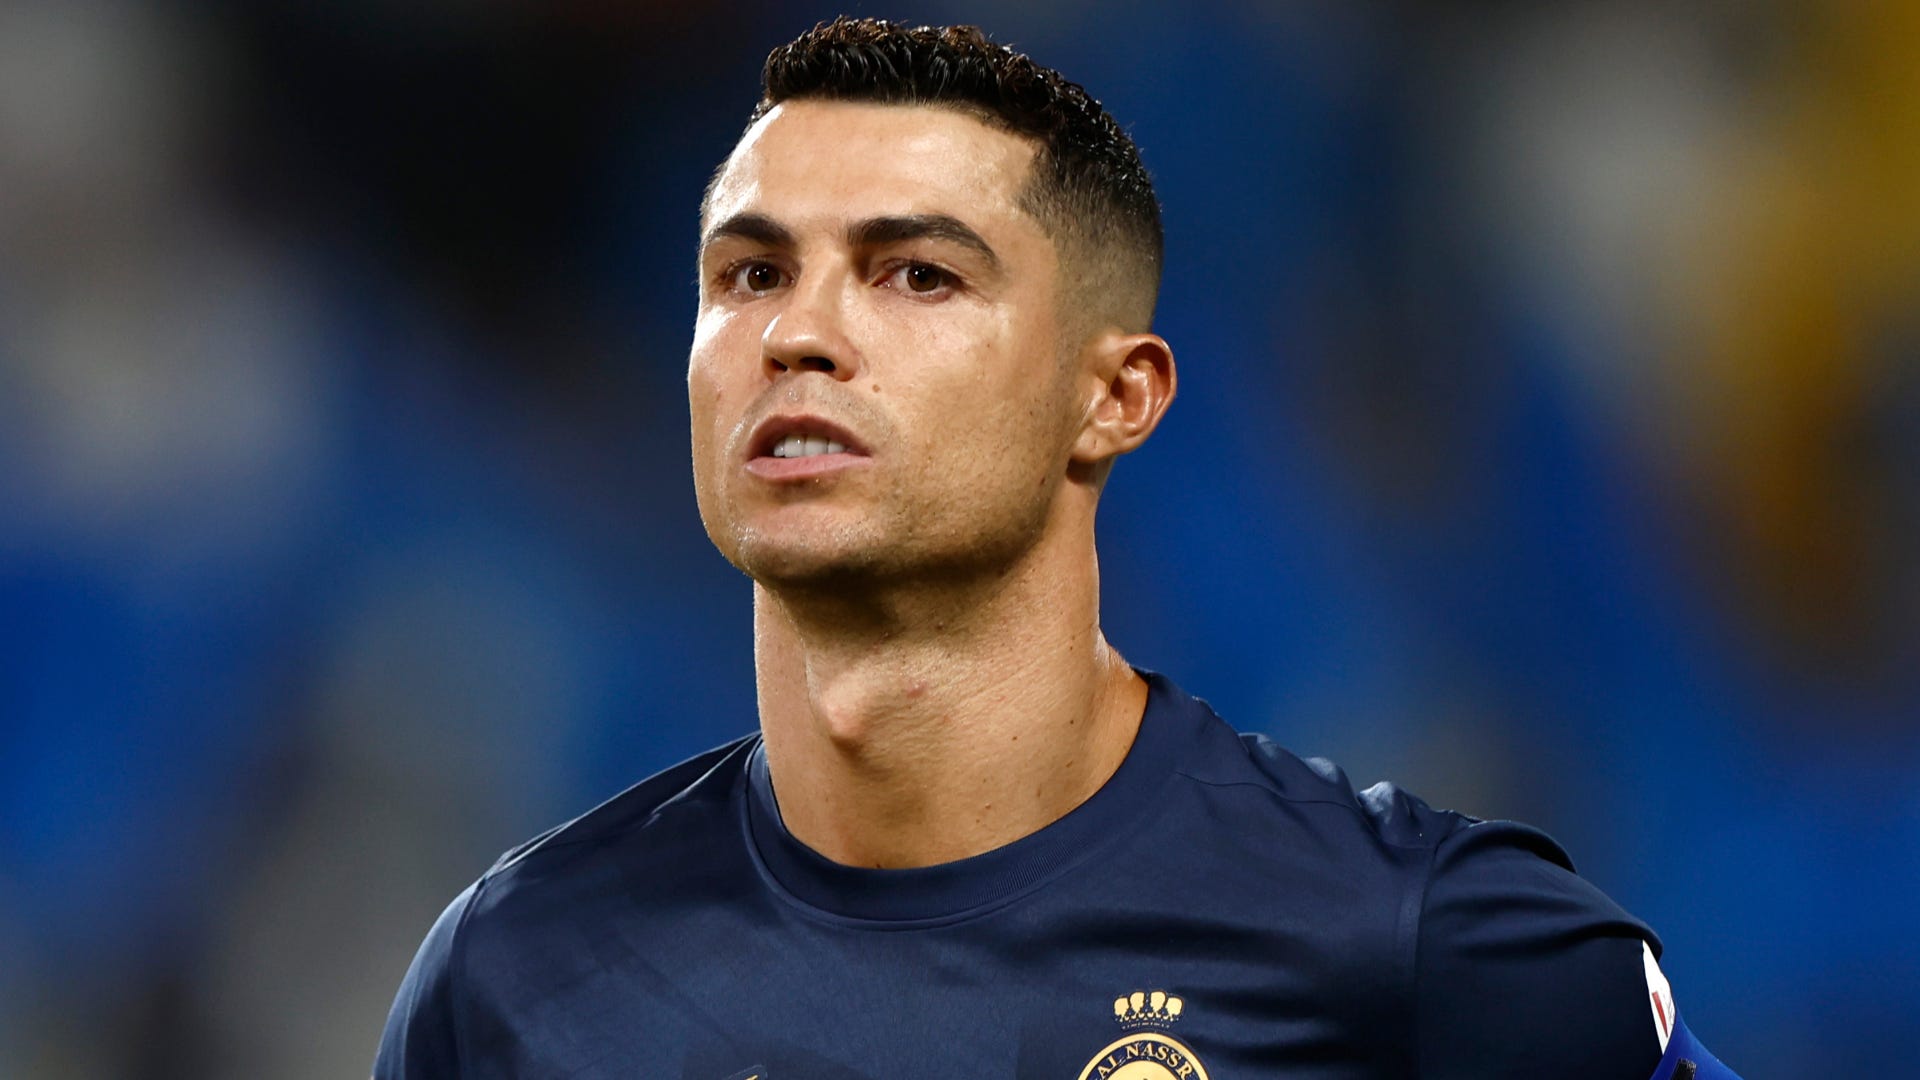 Cristiano Ronaldo returns to Al-Nassr early after Portugal suspension - S-News